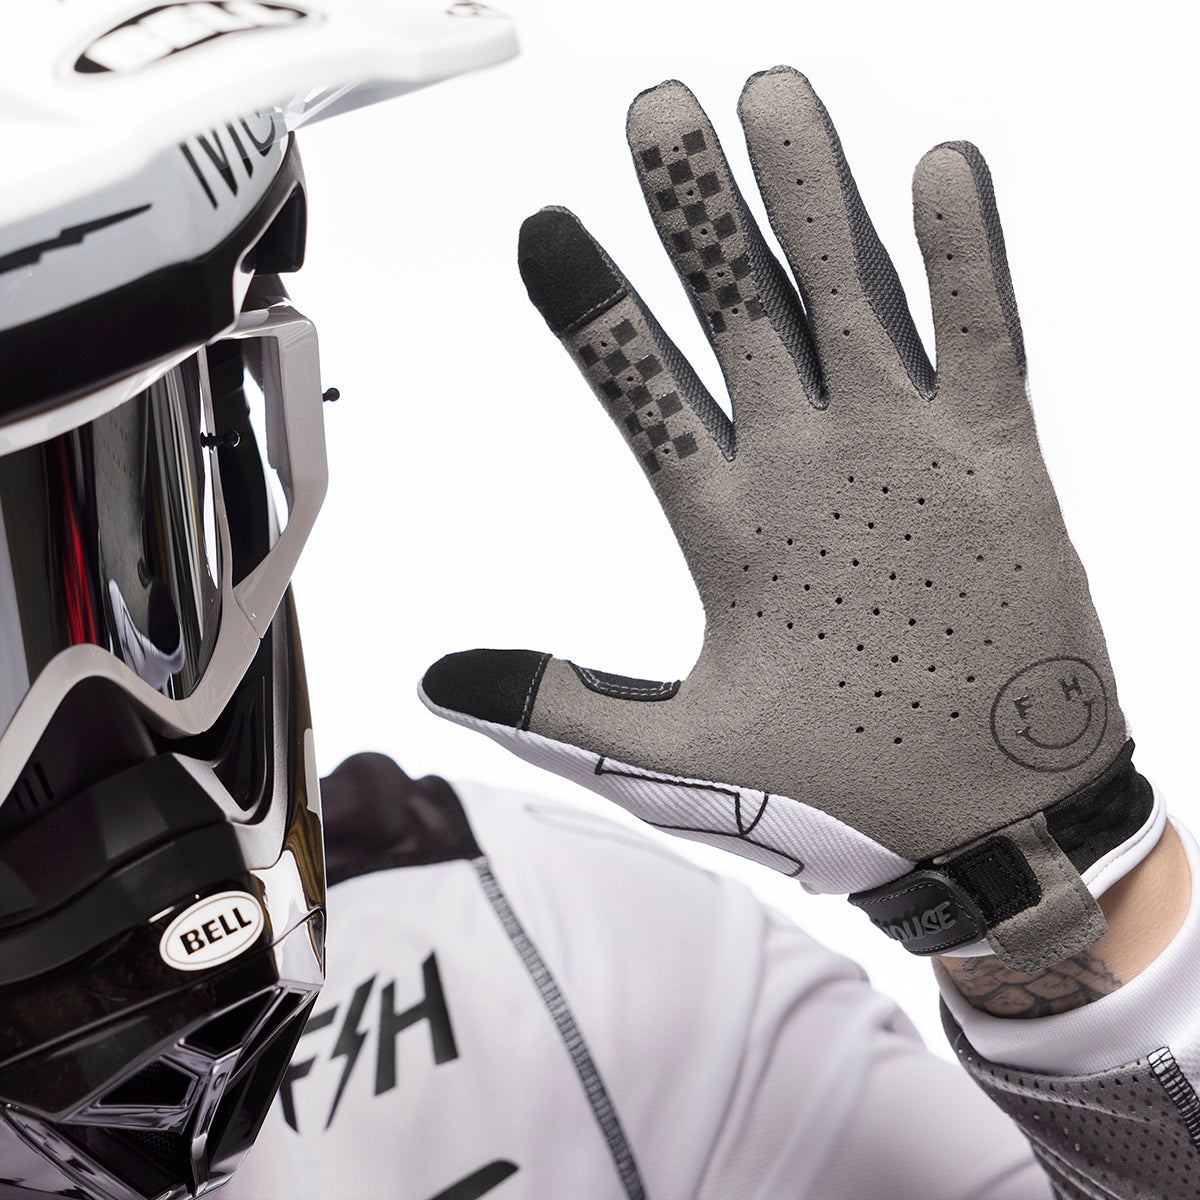 Speed Style Riot Youth Glove - White/Black